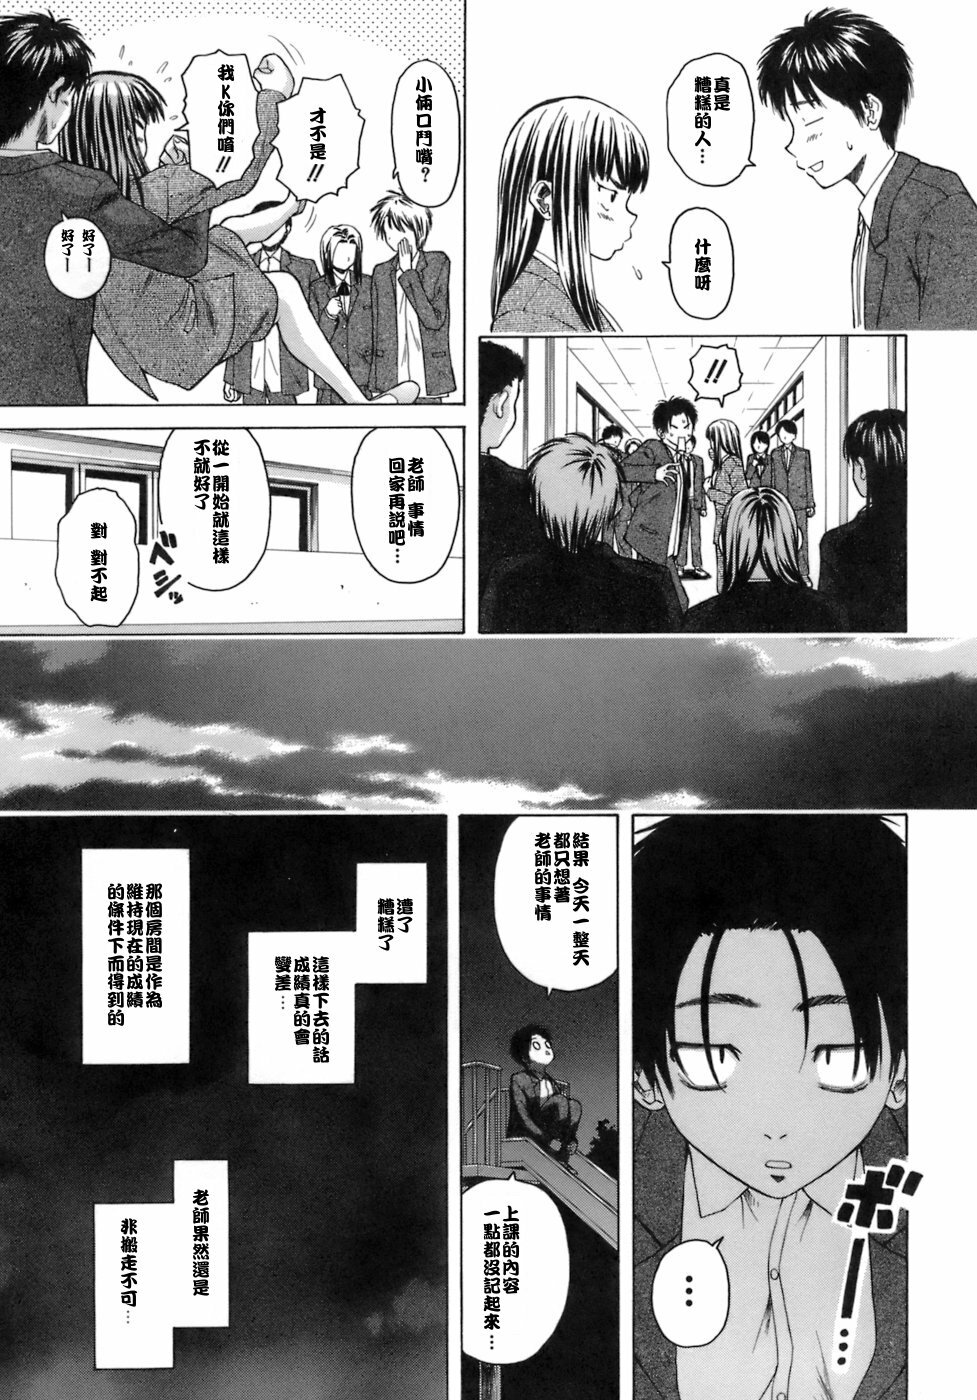 [Fuuga] Kyoushi to Seito to - Teacher and Student [Chinese] [悠月工房] page 46 full